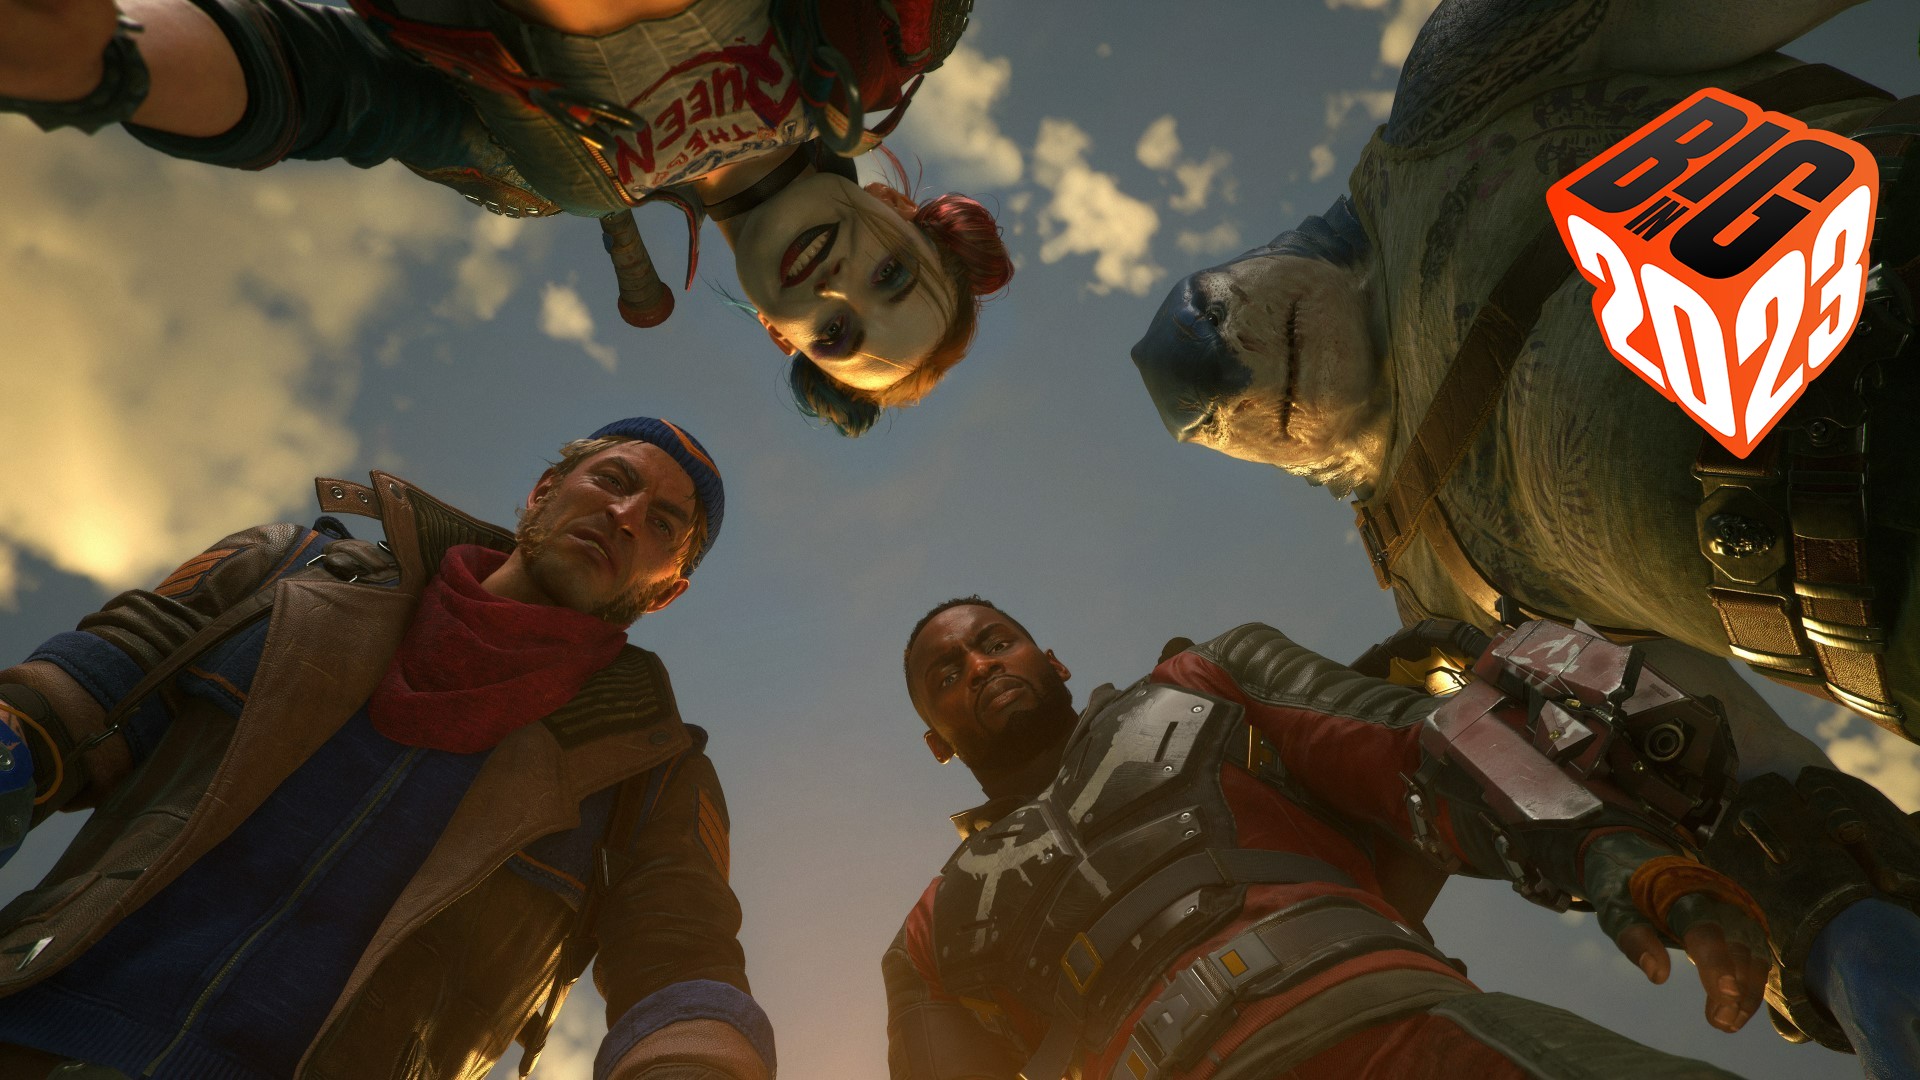 The Game Awards 2022 – An Awaited Suicide Squad Game Ends the Long